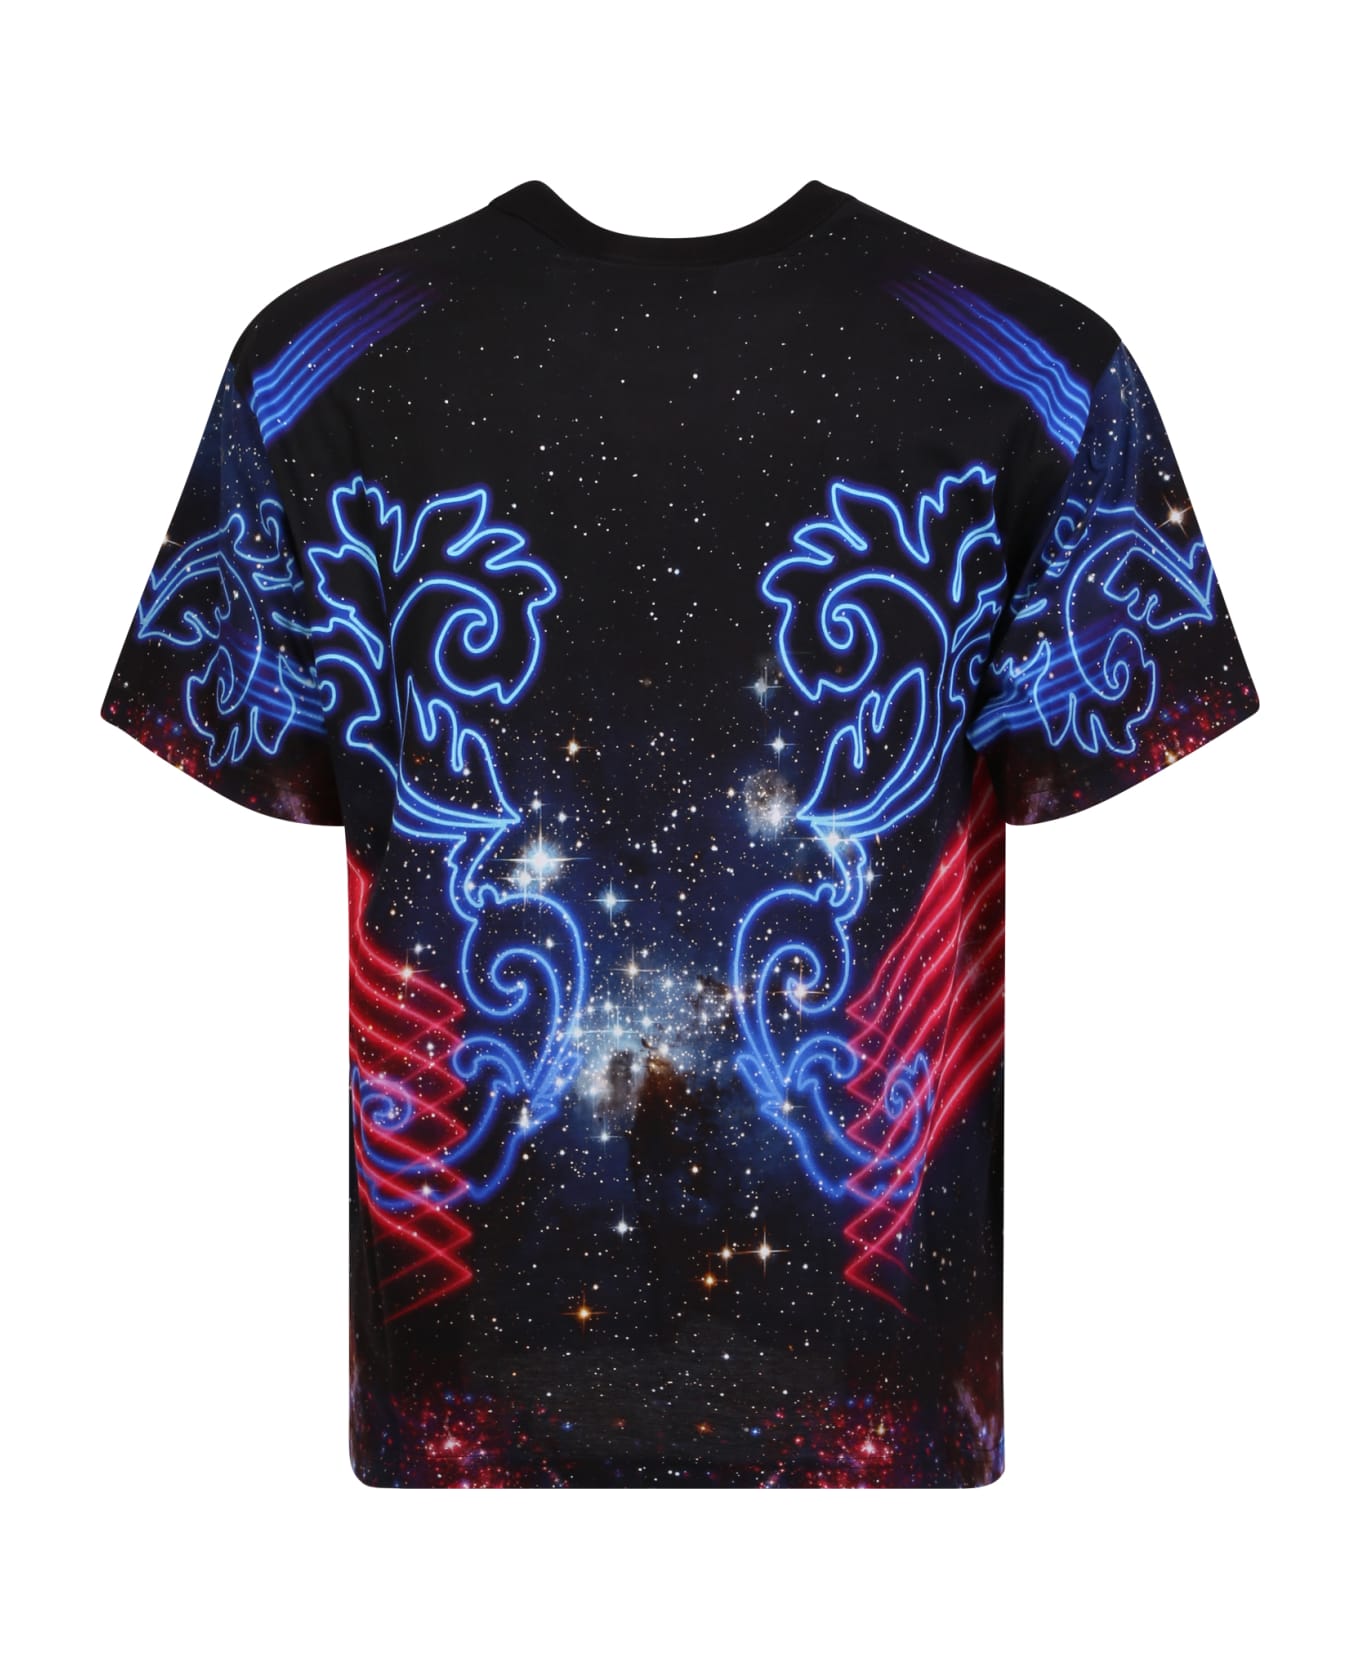 Versace Jeans Couture T-shirt With Galaxy Print Black - Blue シャツ